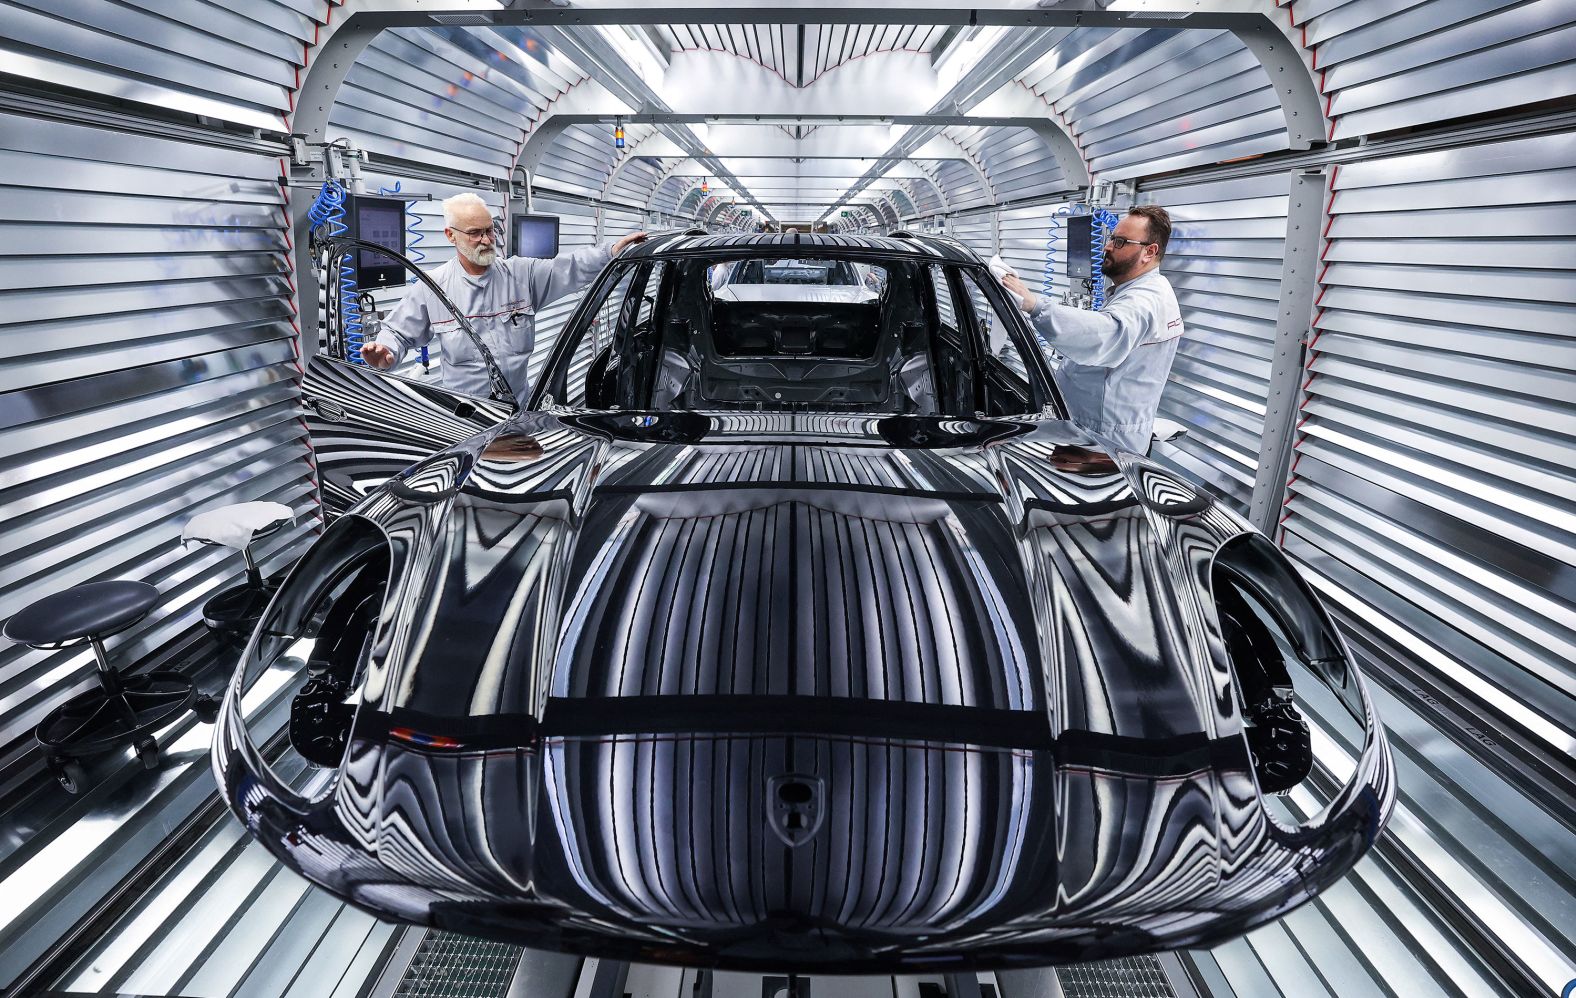 Workers assemble a Porsche Macan at a plant in Leipzig, Germany, on Monday, March 11.